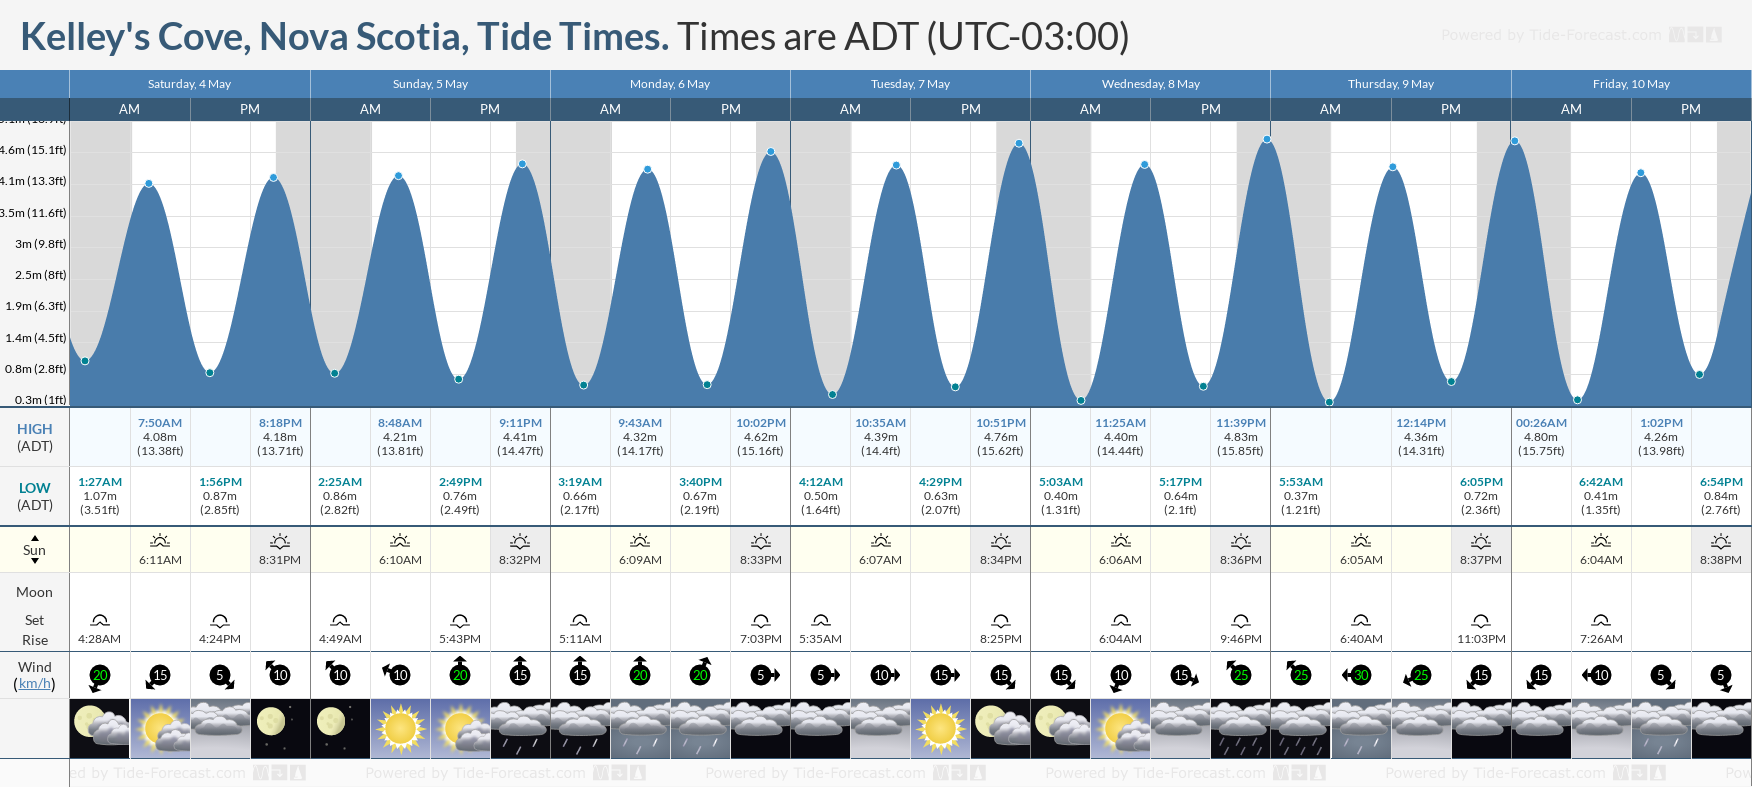 Kelley's Cove, Nova Scotia Tide Chart including high and low tide tide times for the next 7 days